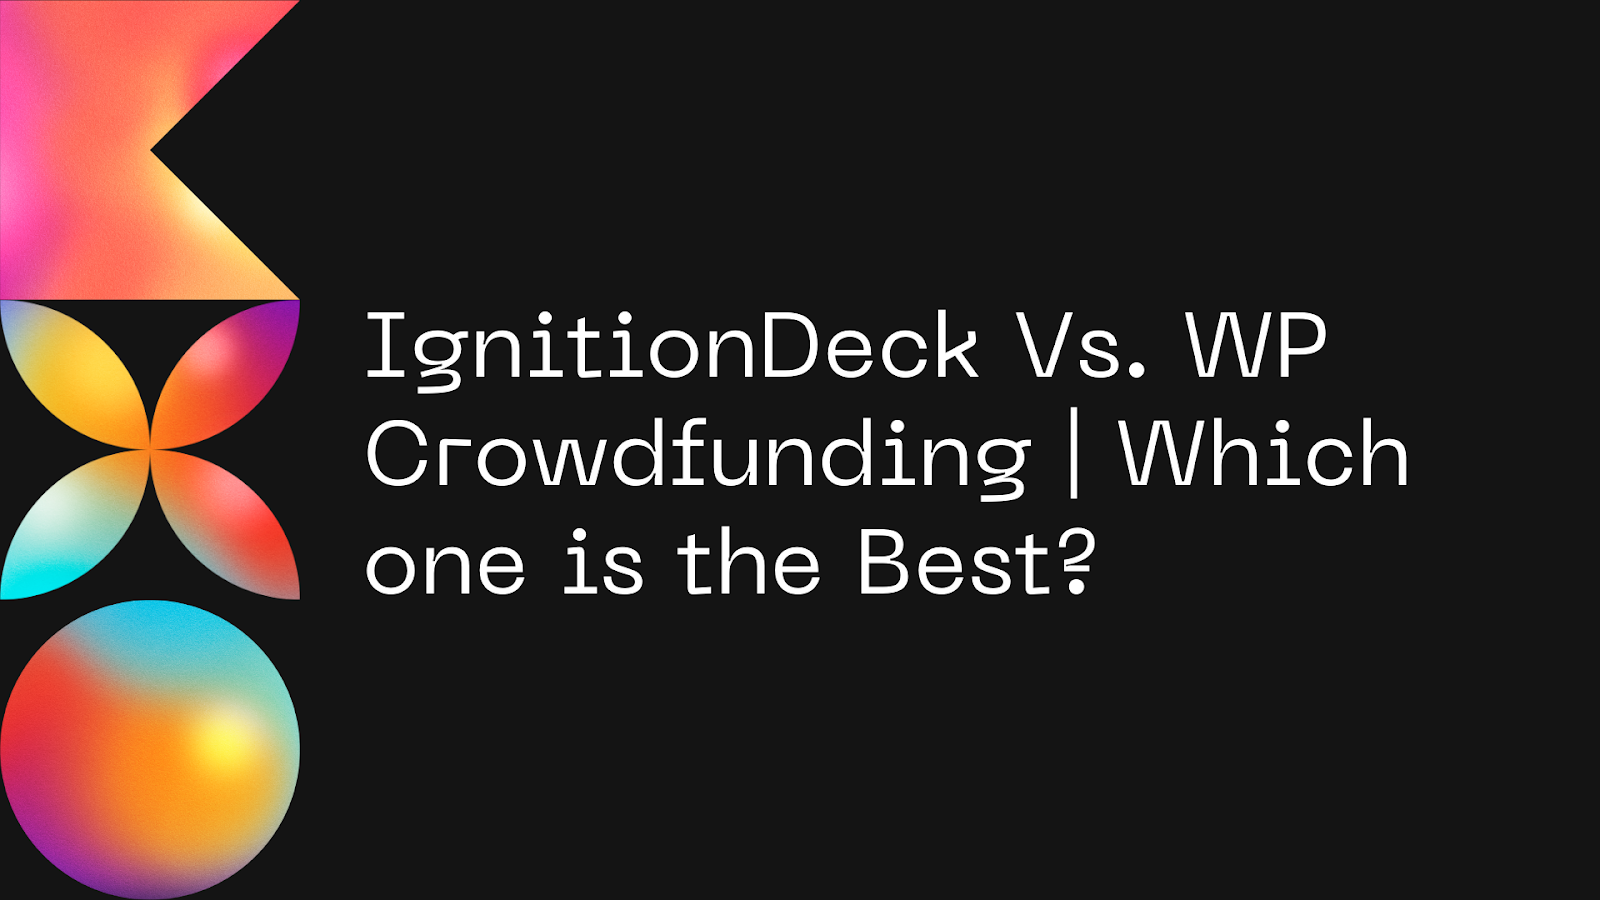 ignitiondeck-vs-wp-crowdfunding-which-one-is-the-best.jpg